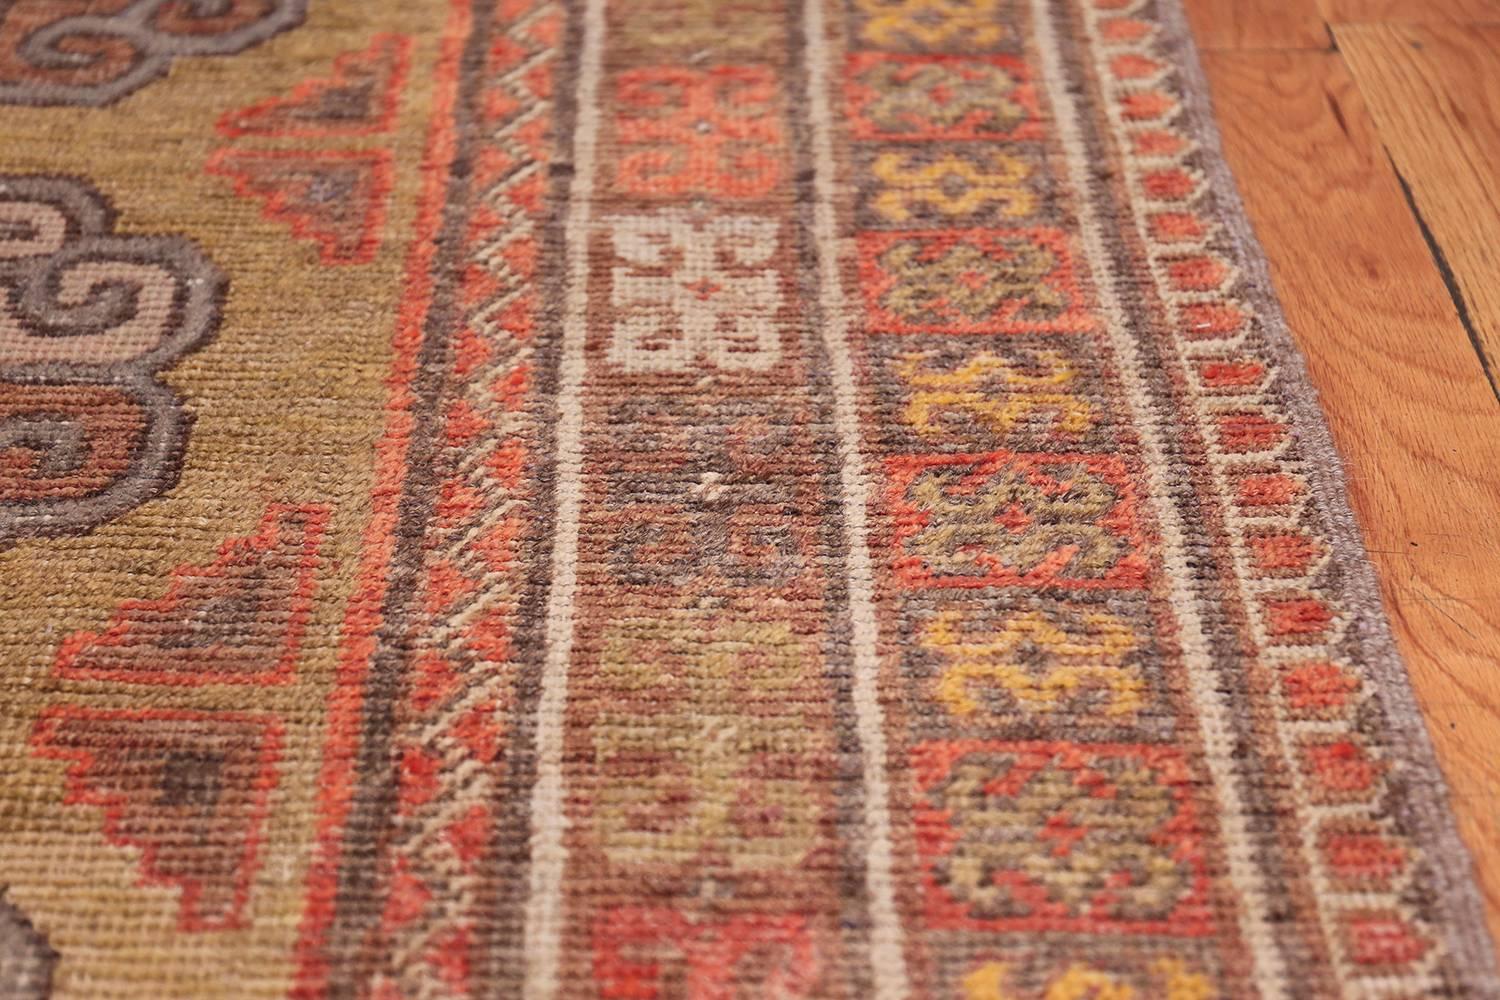 19th Century Nazmiyal Collection Antique Khotan Rug. Size: 6 ft 1 in x 11 ft 10 in